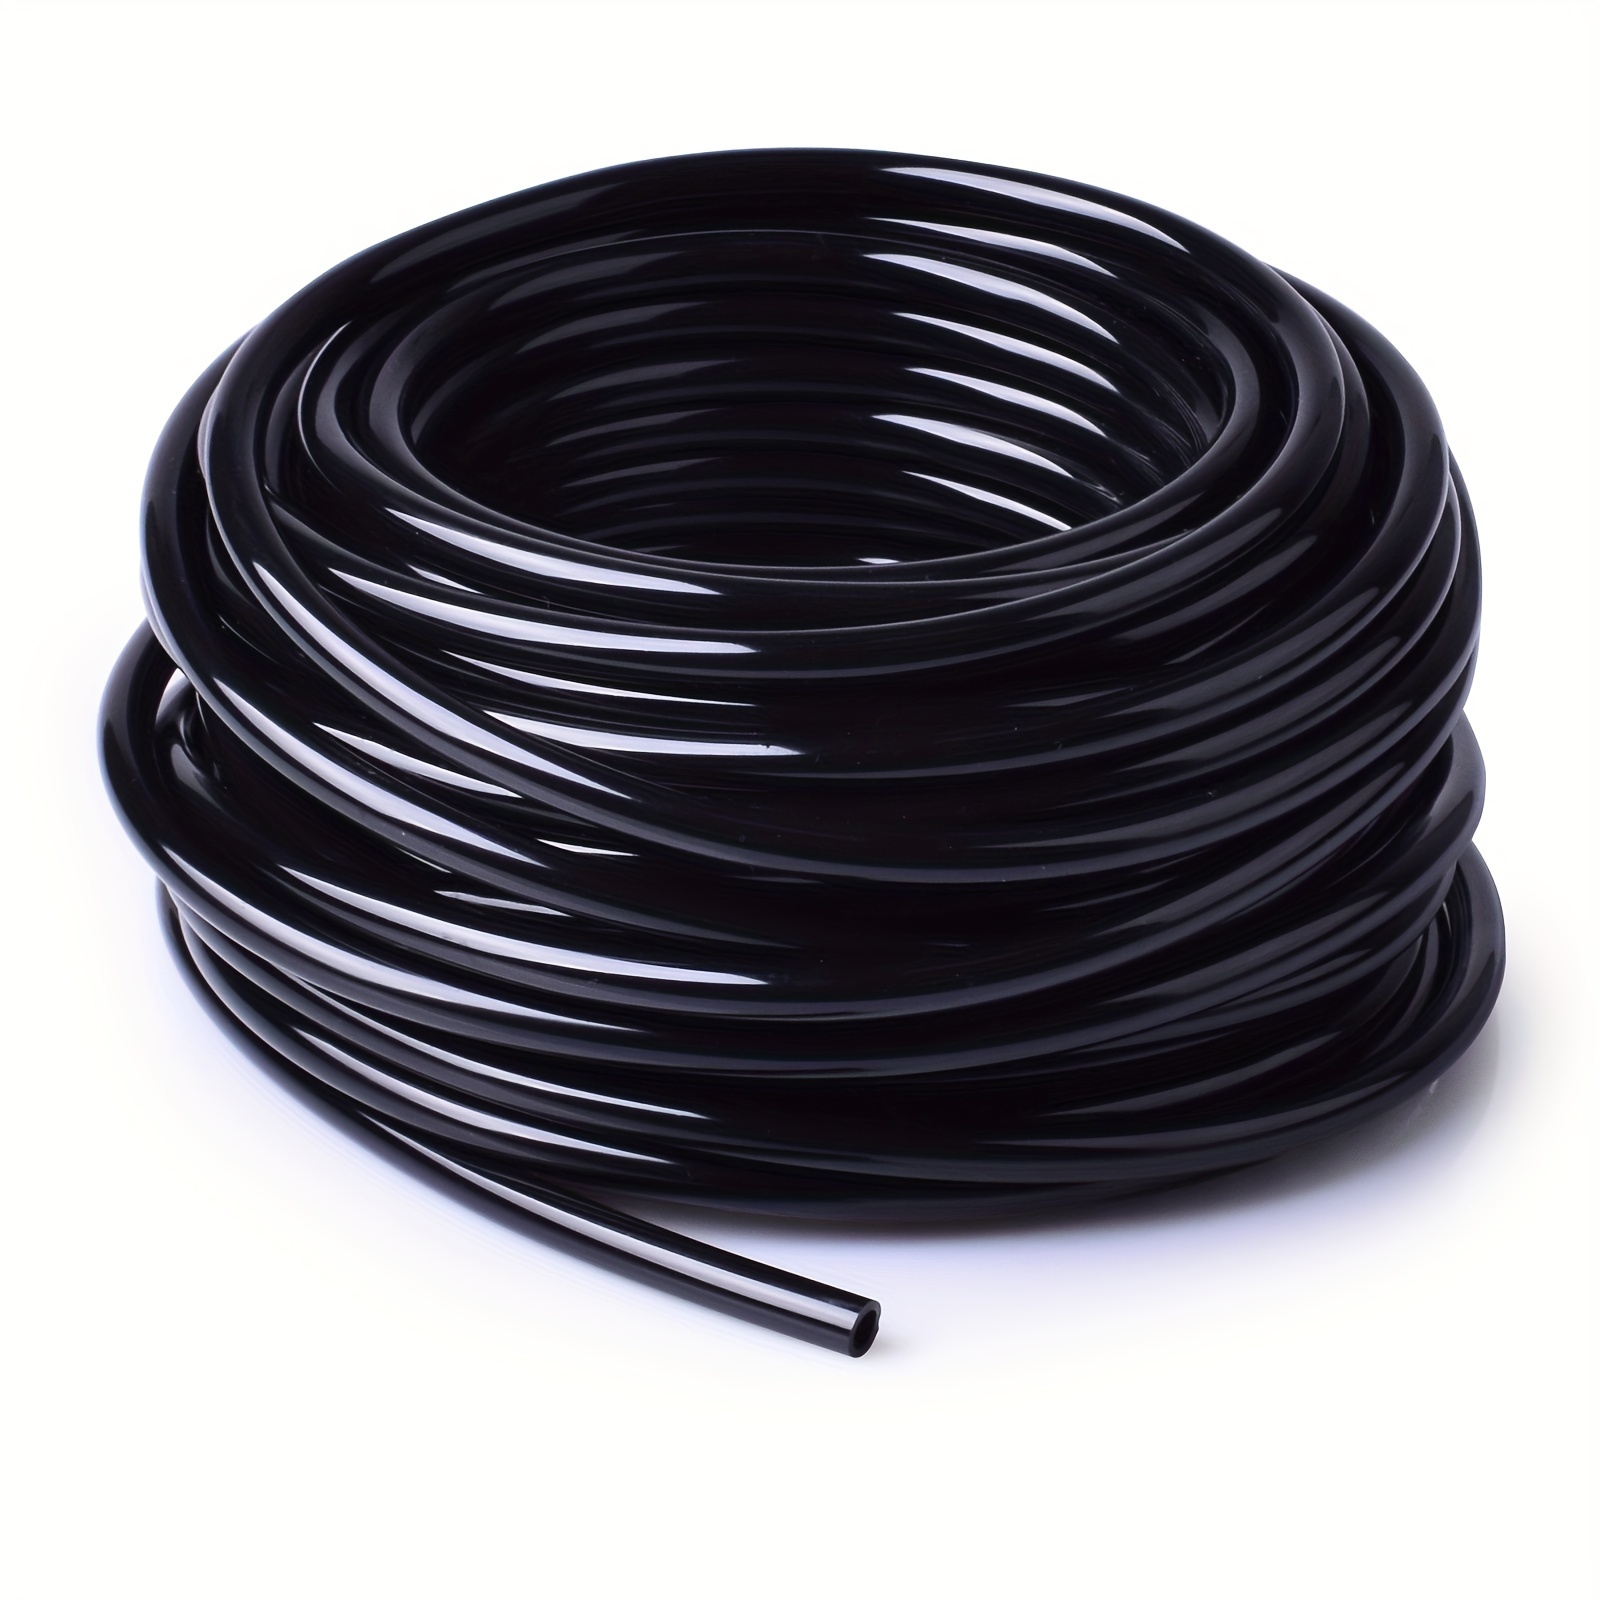 

1pc 100ft 1/4" Drip Irrigation Tubing, Distribution Tubing Garden Watering Tube Line For Garden Irrigation System